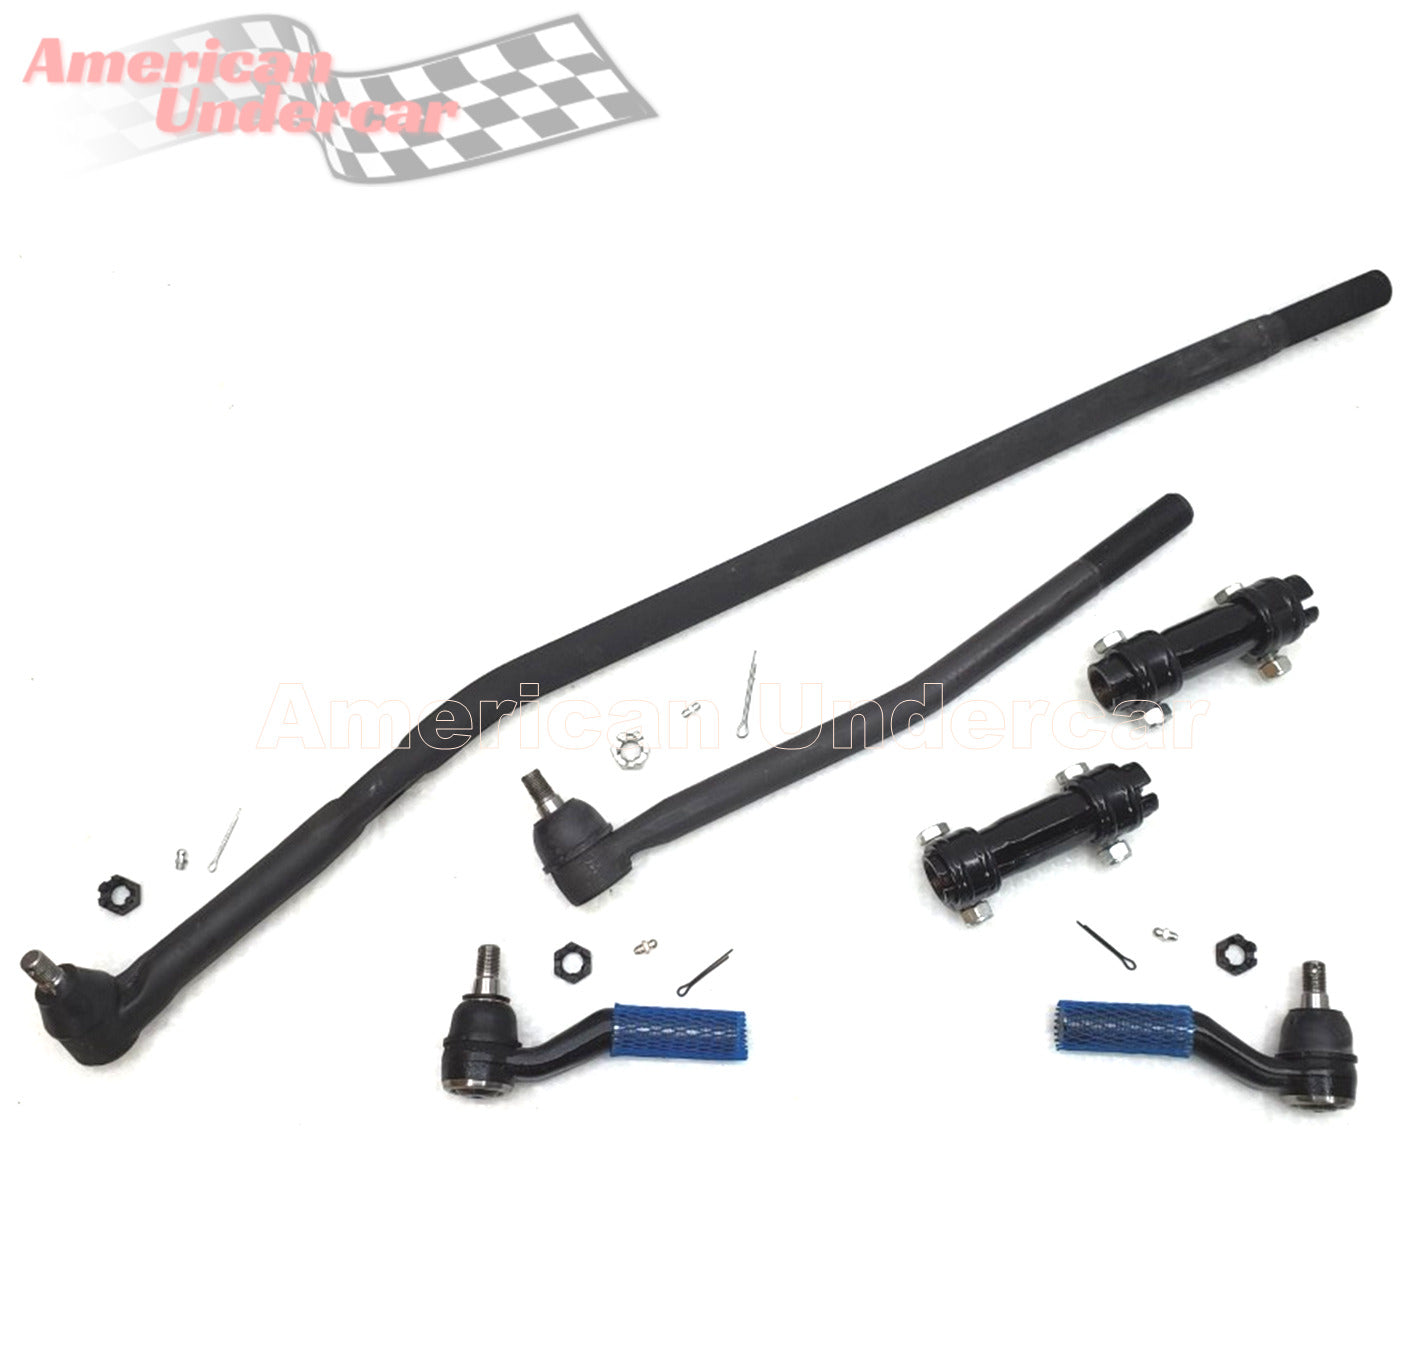 HD Drag Link Tie Rod Sleeve Steering Kit for 2007-2014 Ford E250 2WD